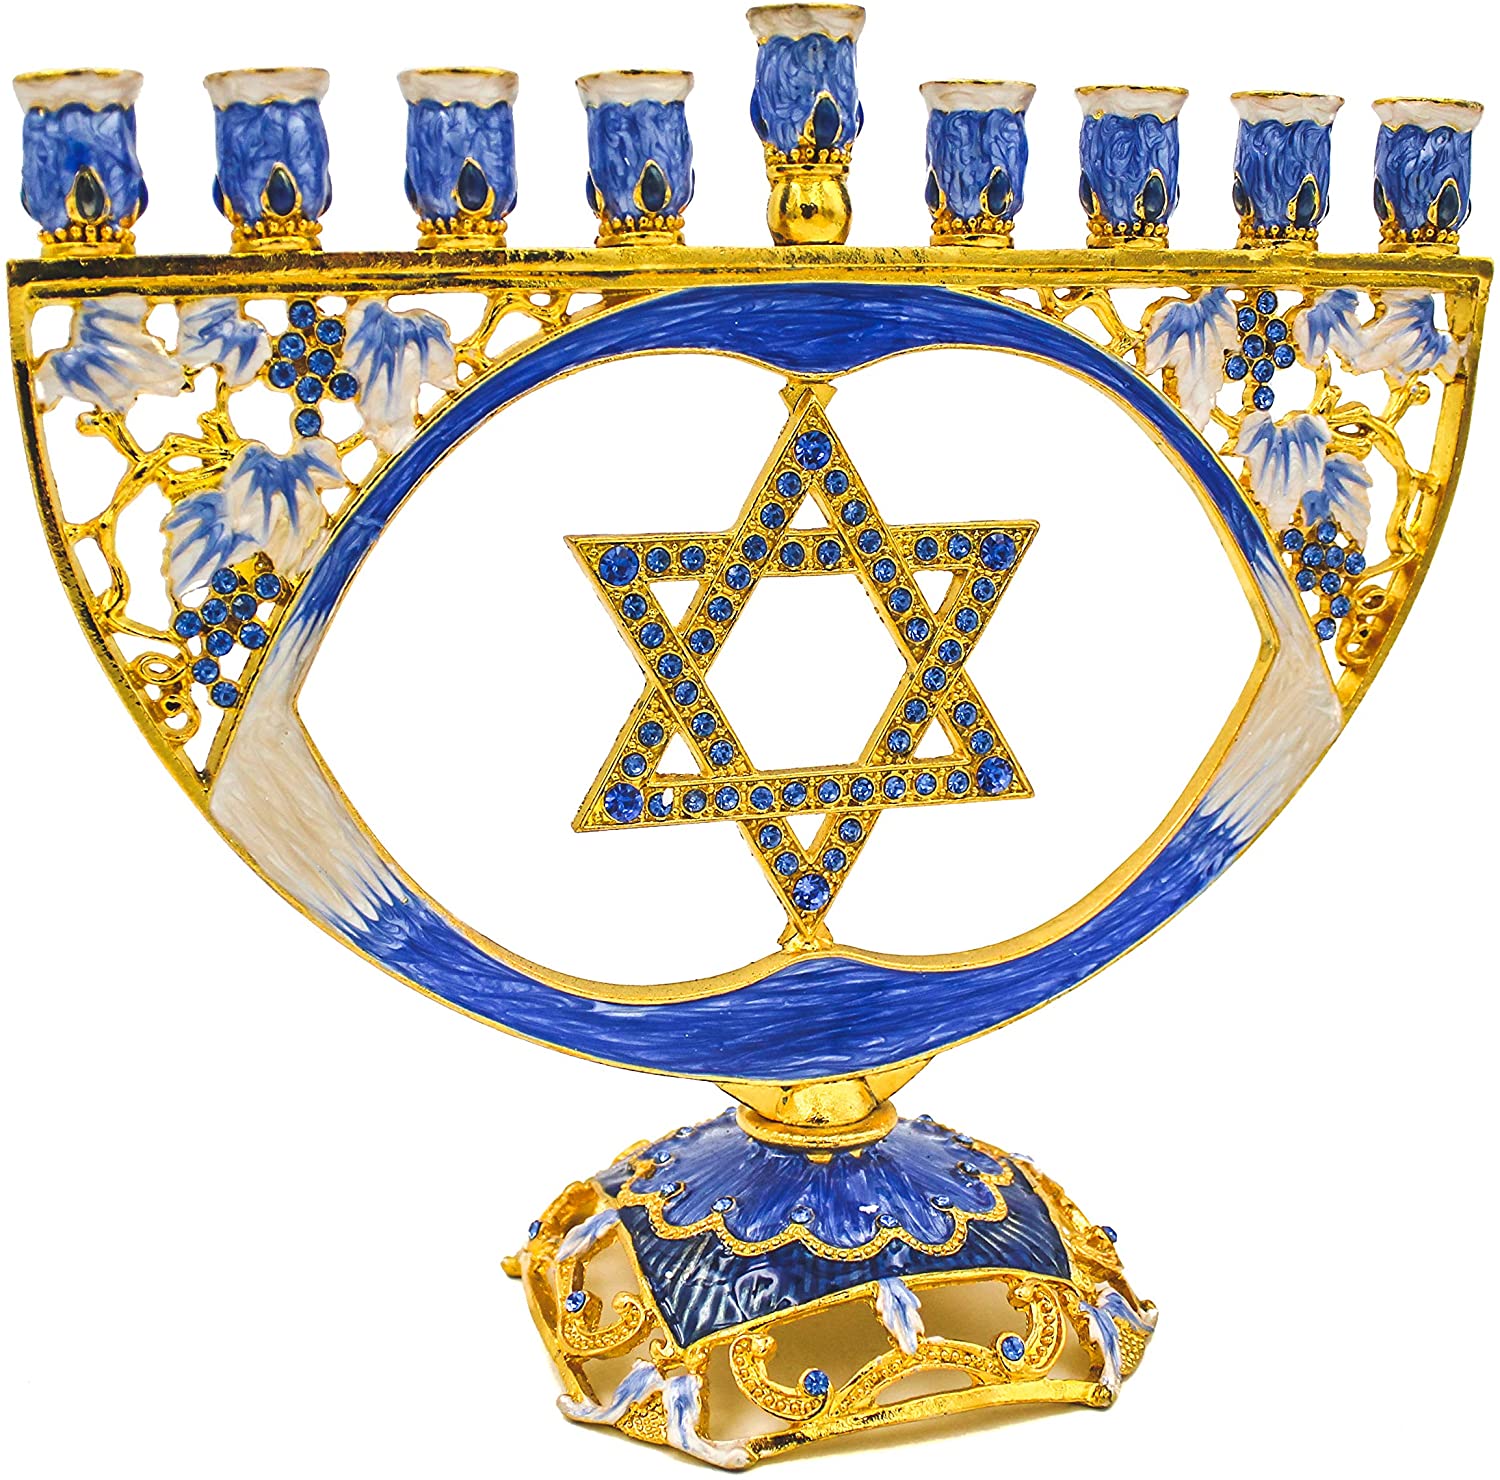 Enameled Menorah with Jeweled Accents